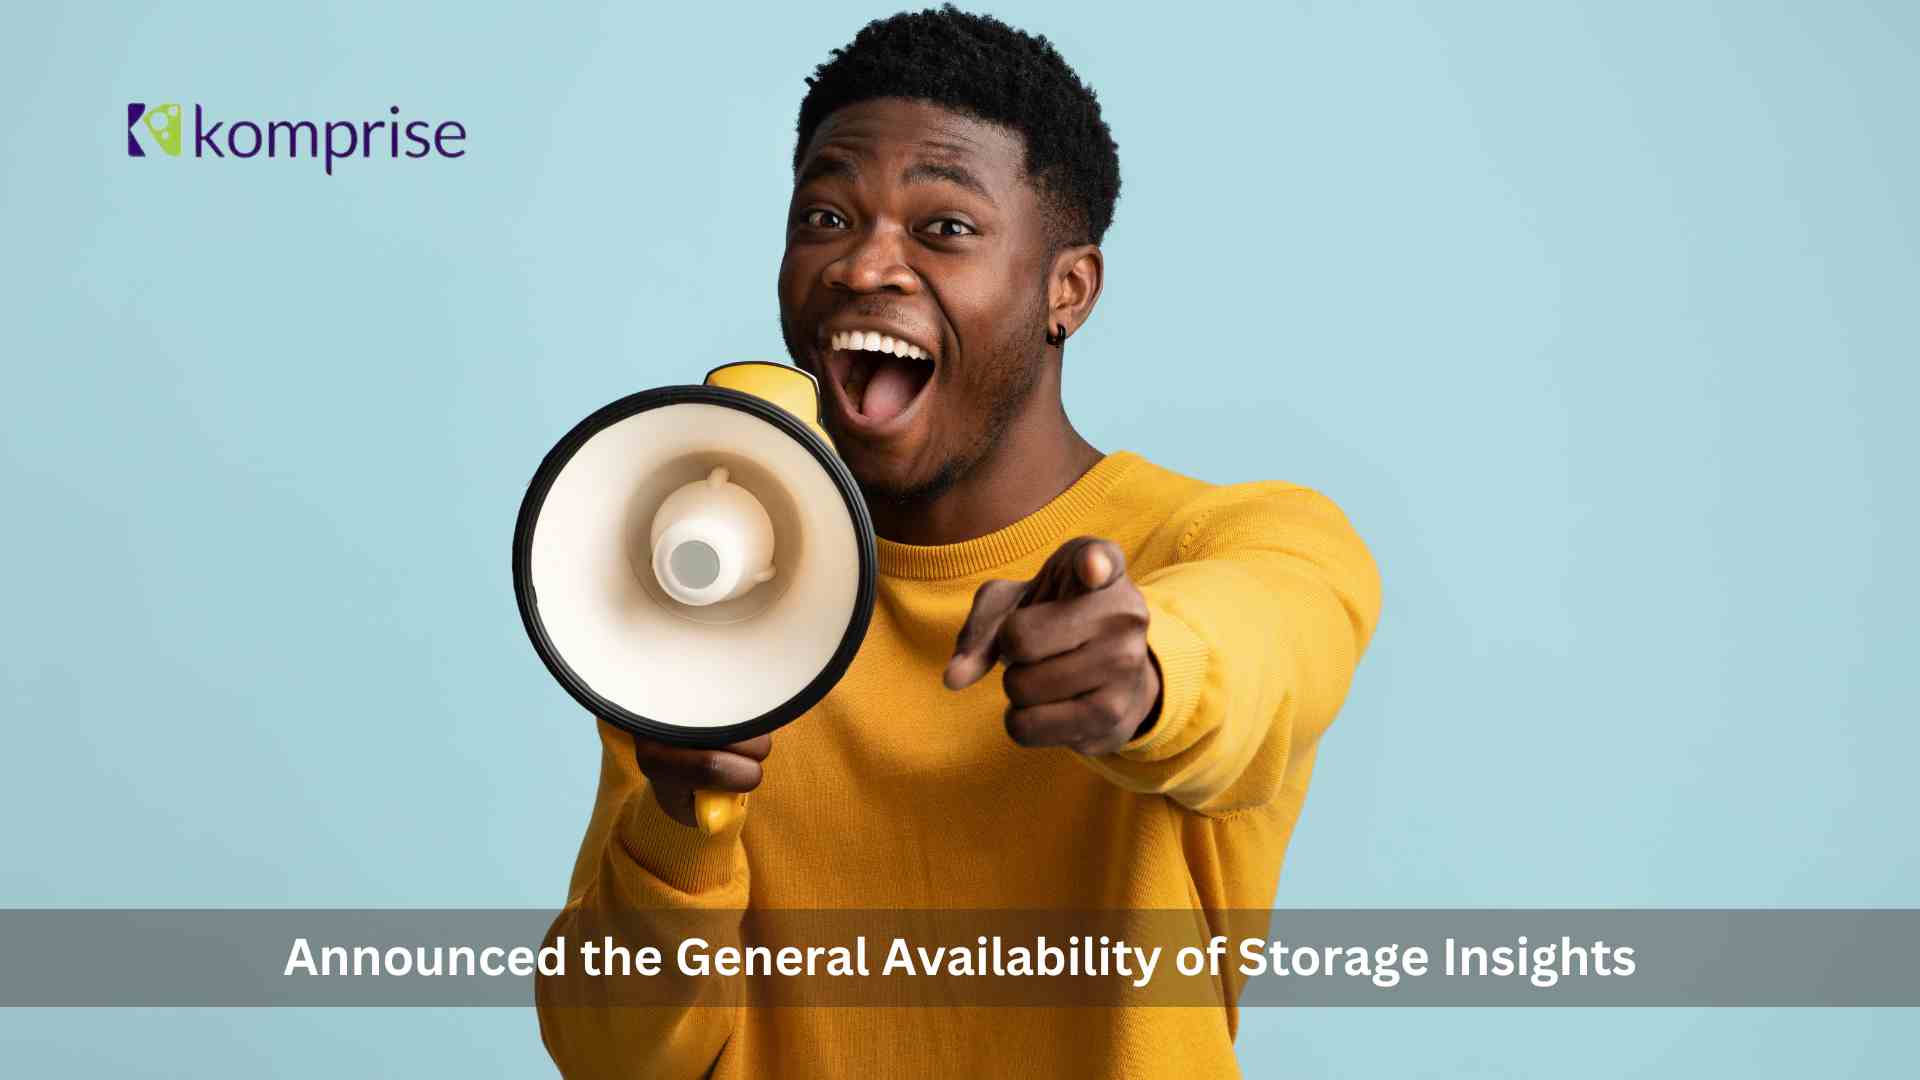 Komprise Introduces Storage Insights to Unify Data and Storage Management